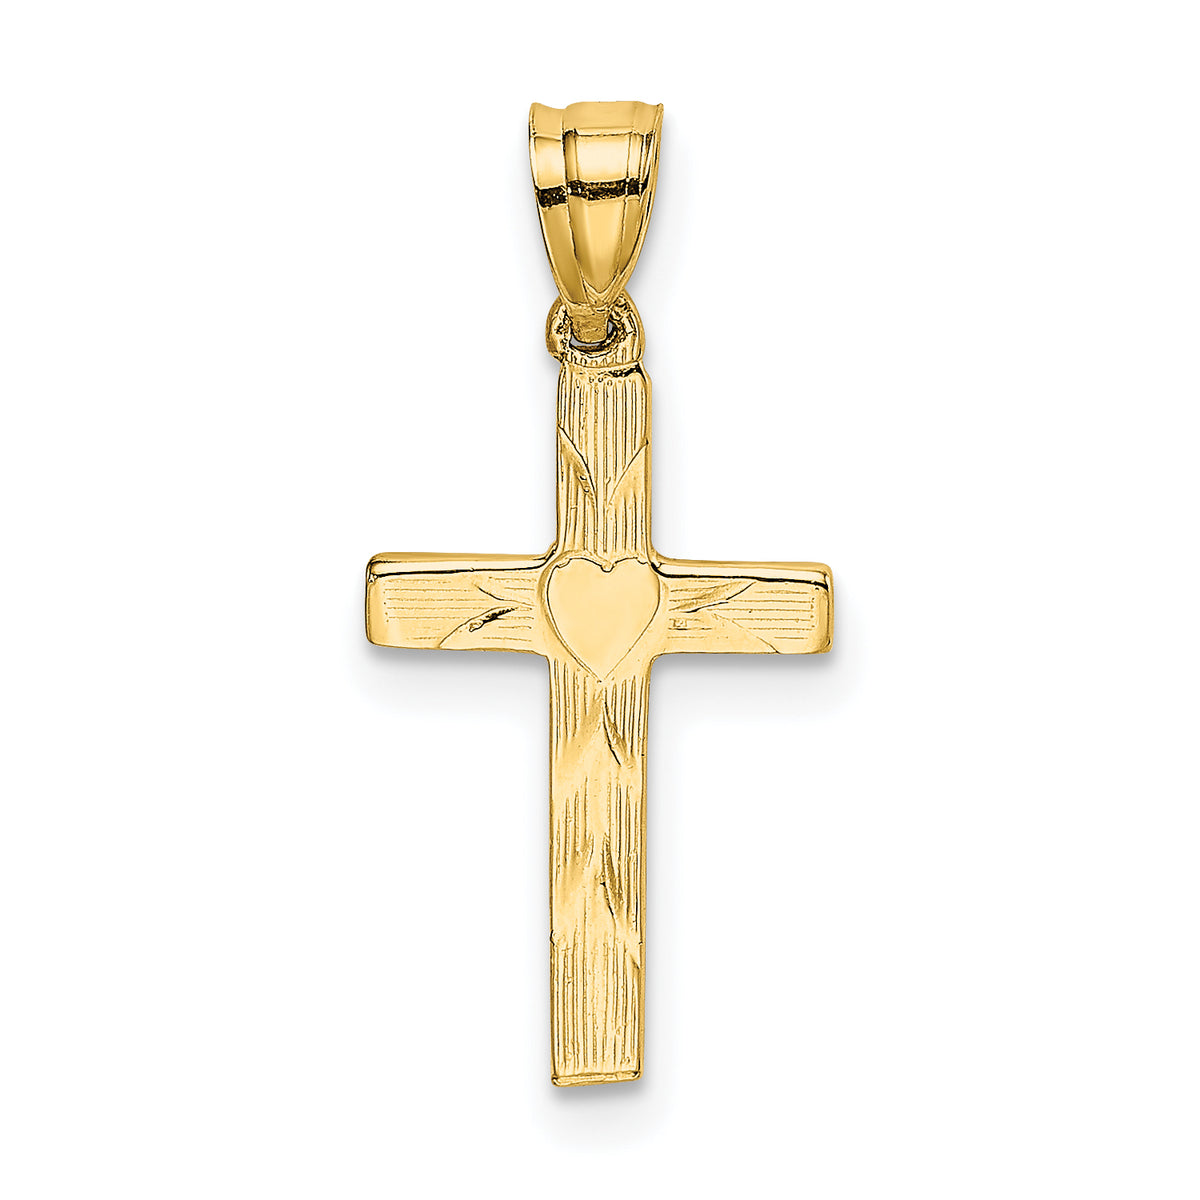 10K Polished and Engraved Cross W/ Heart Center Charm